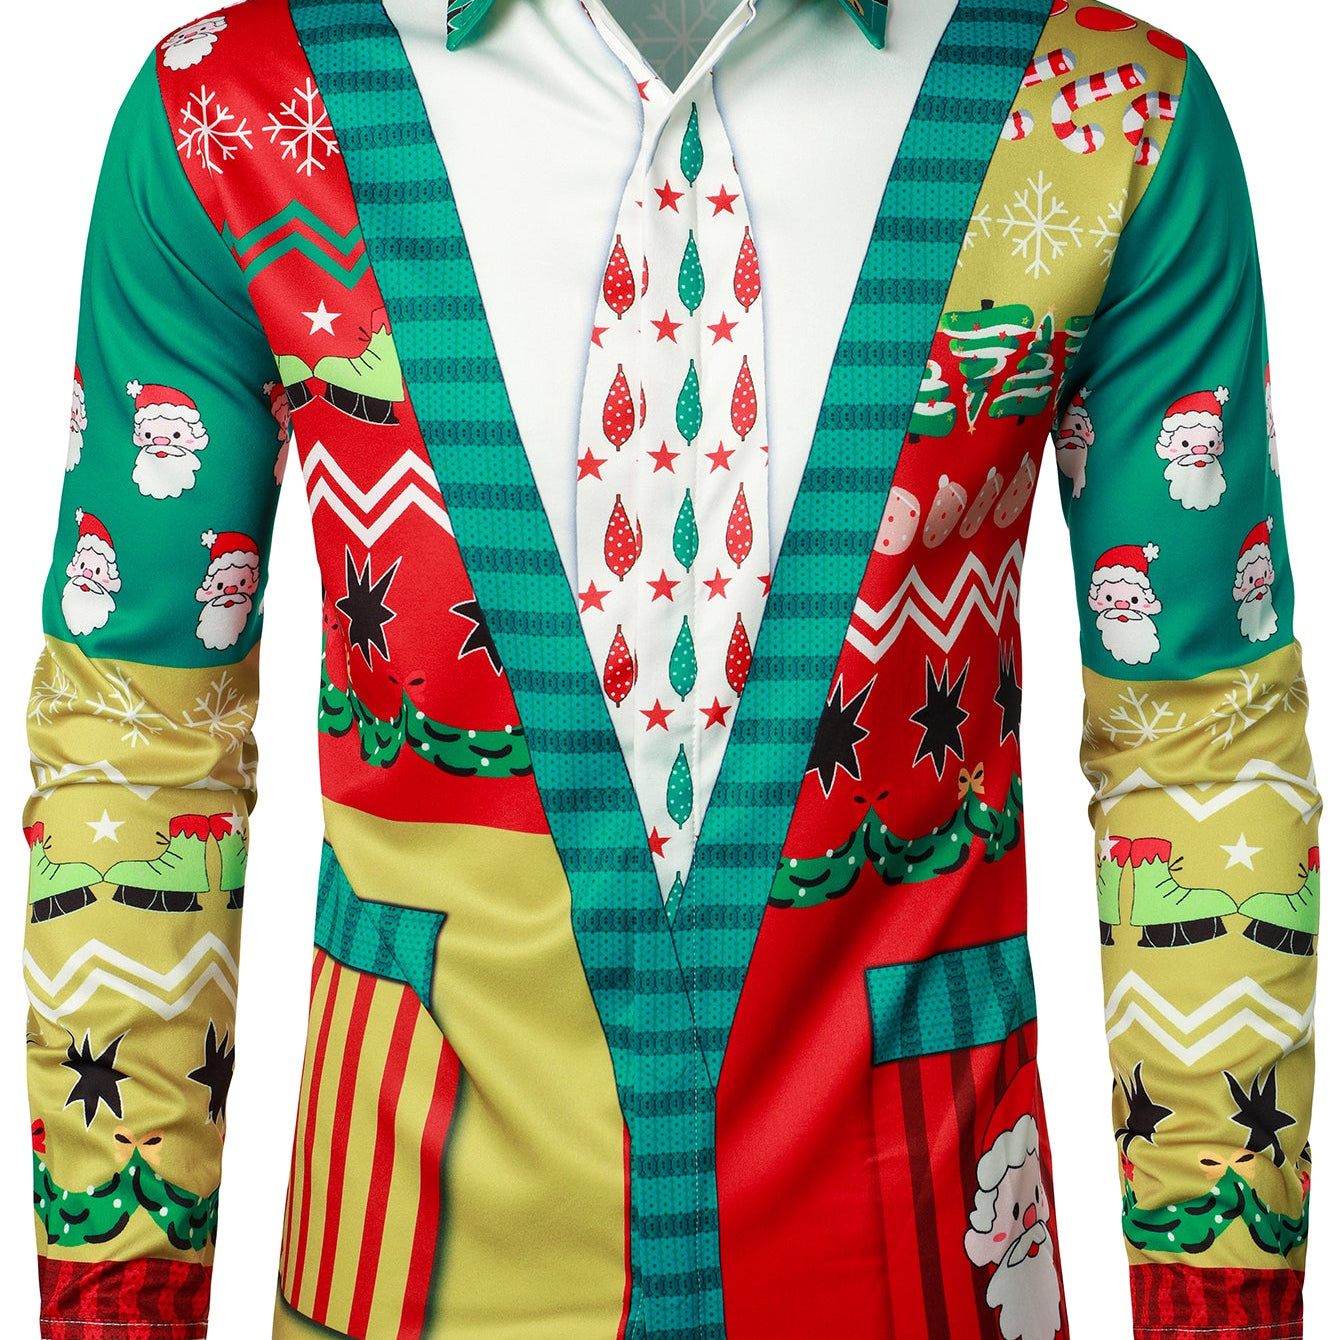 Men's Funny Christmas Print Long Sleeve Button Up Vacation Shirt